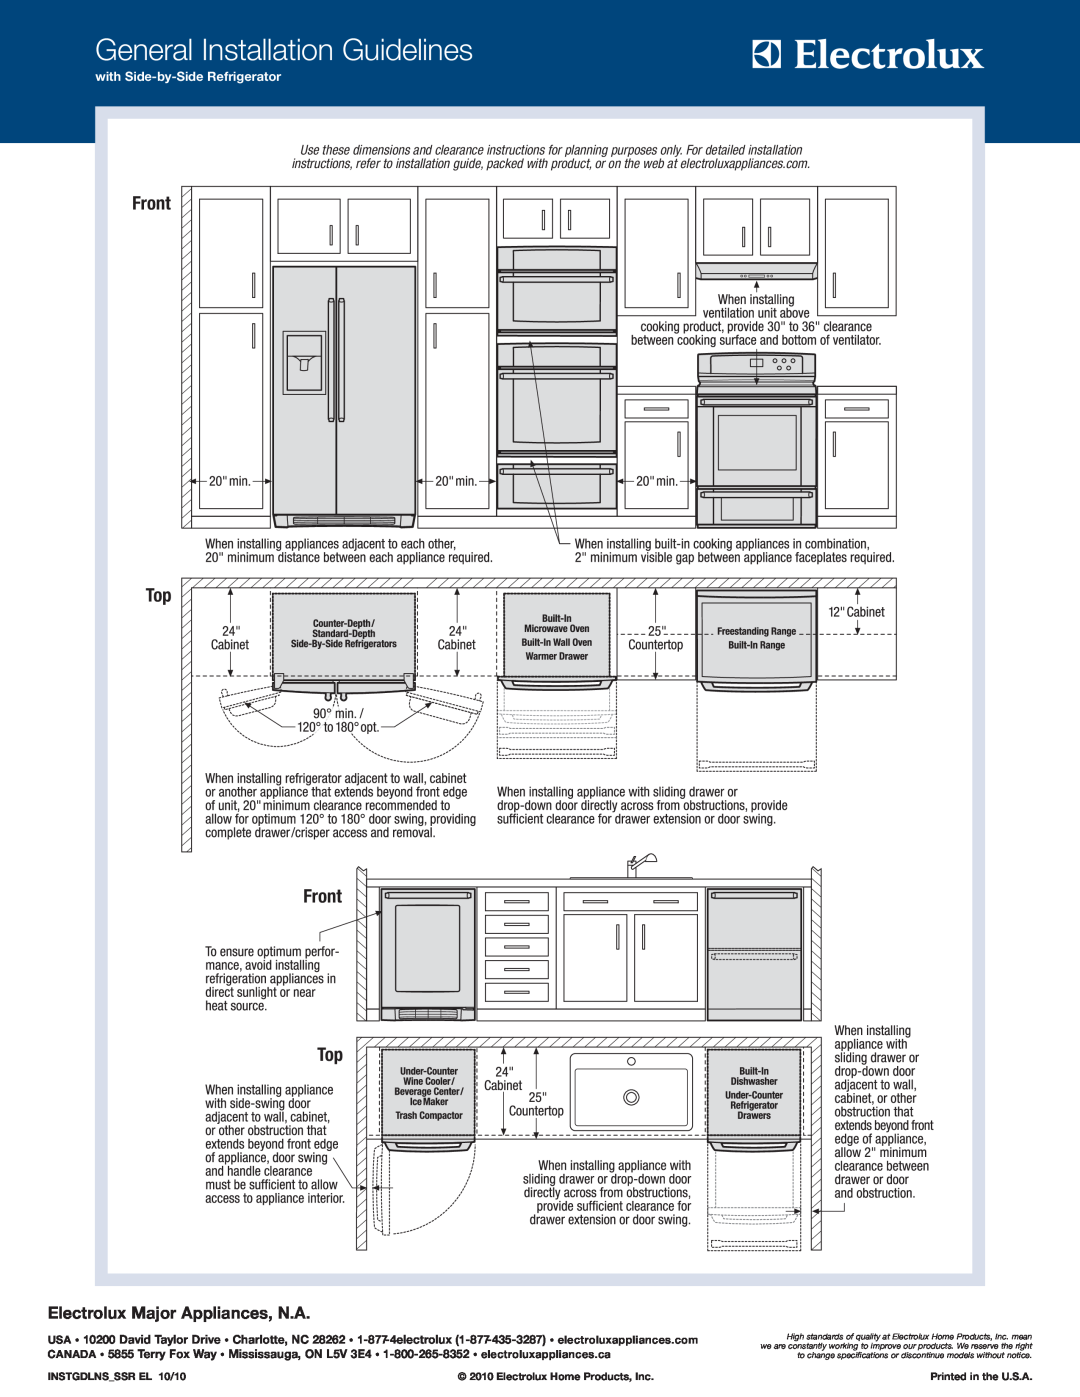 Electrolux EW30EW55G S, EW30EW55G W, EW30EW55G B General Installation Guidelines, Front, Electrolux Major Appliances, N.A 